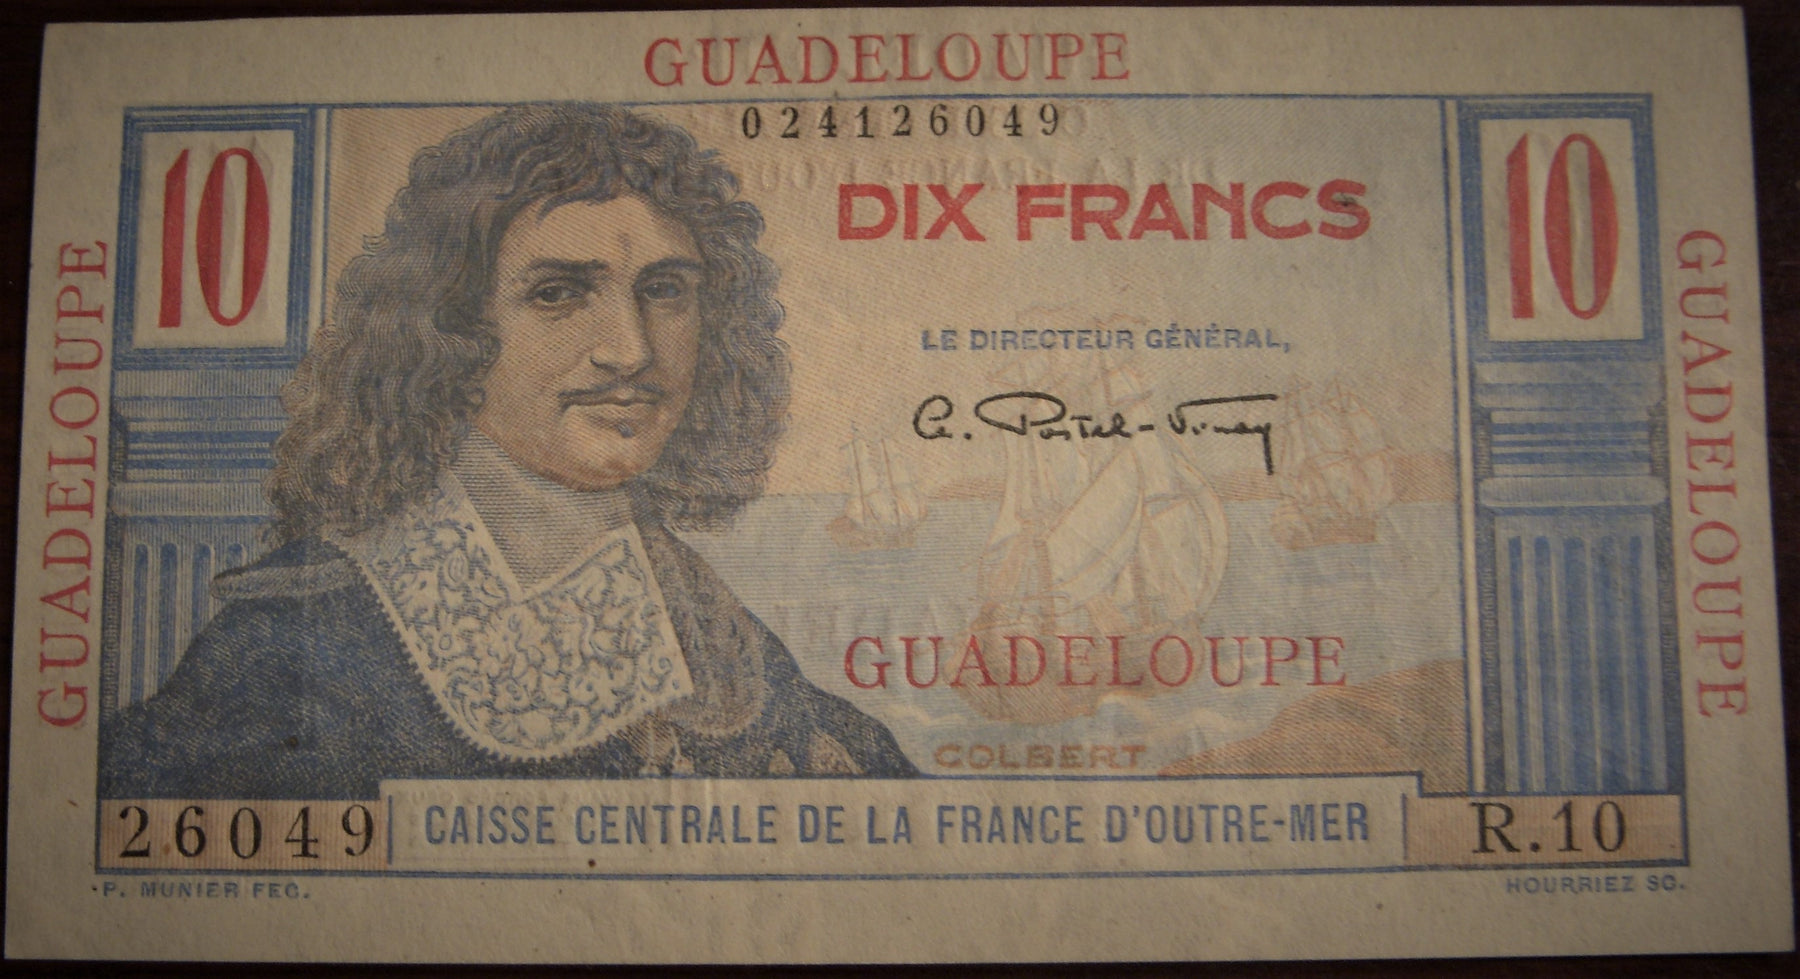 1947 - 1949 10 Francs Note - Guadelope